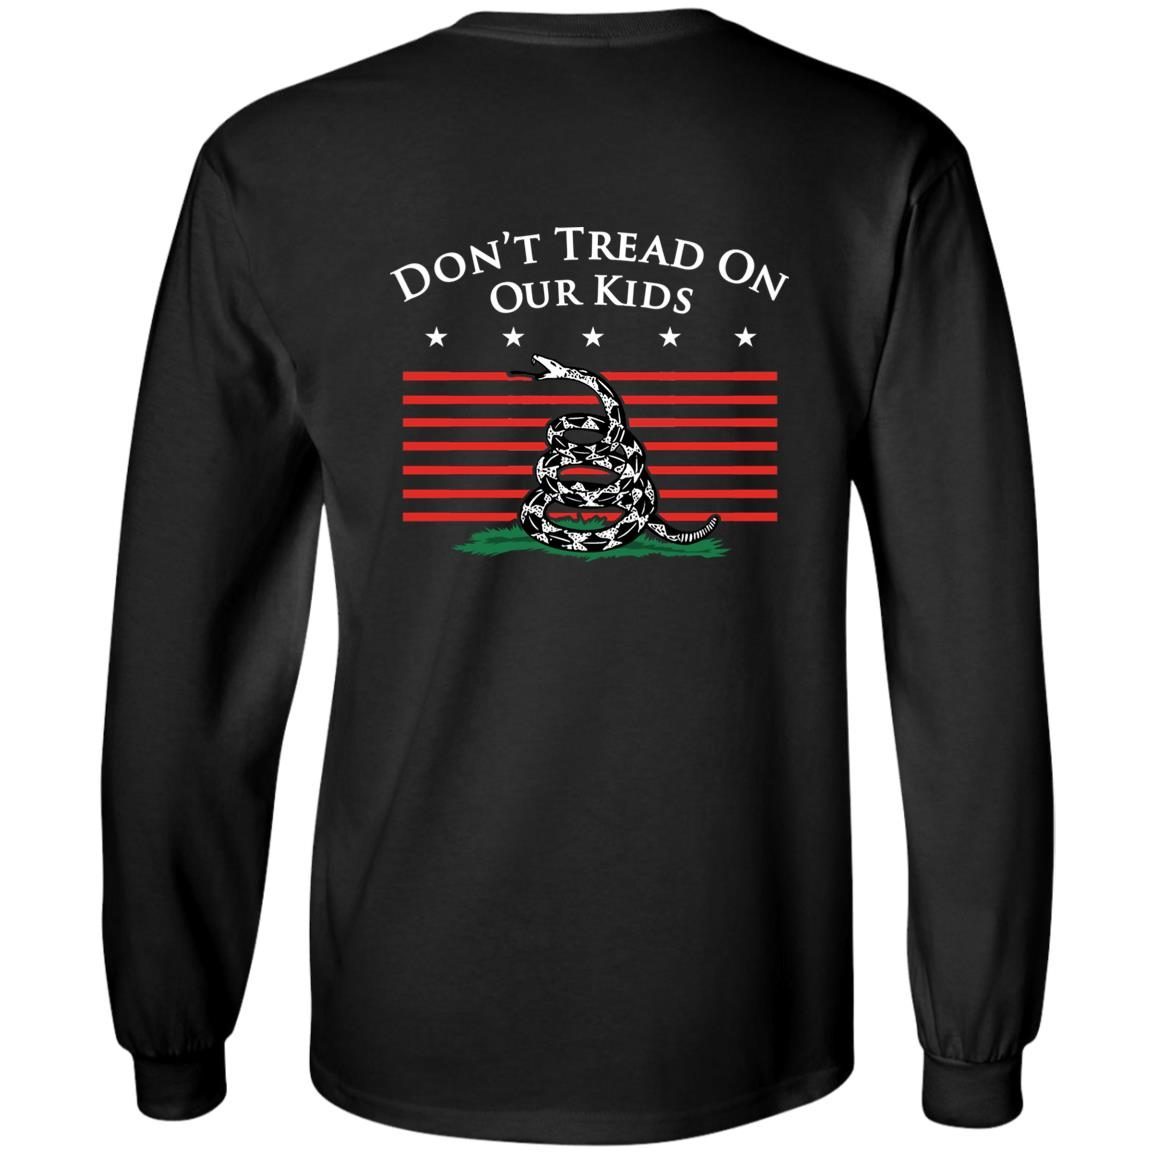 Don’t Tread On Our Kids shirt